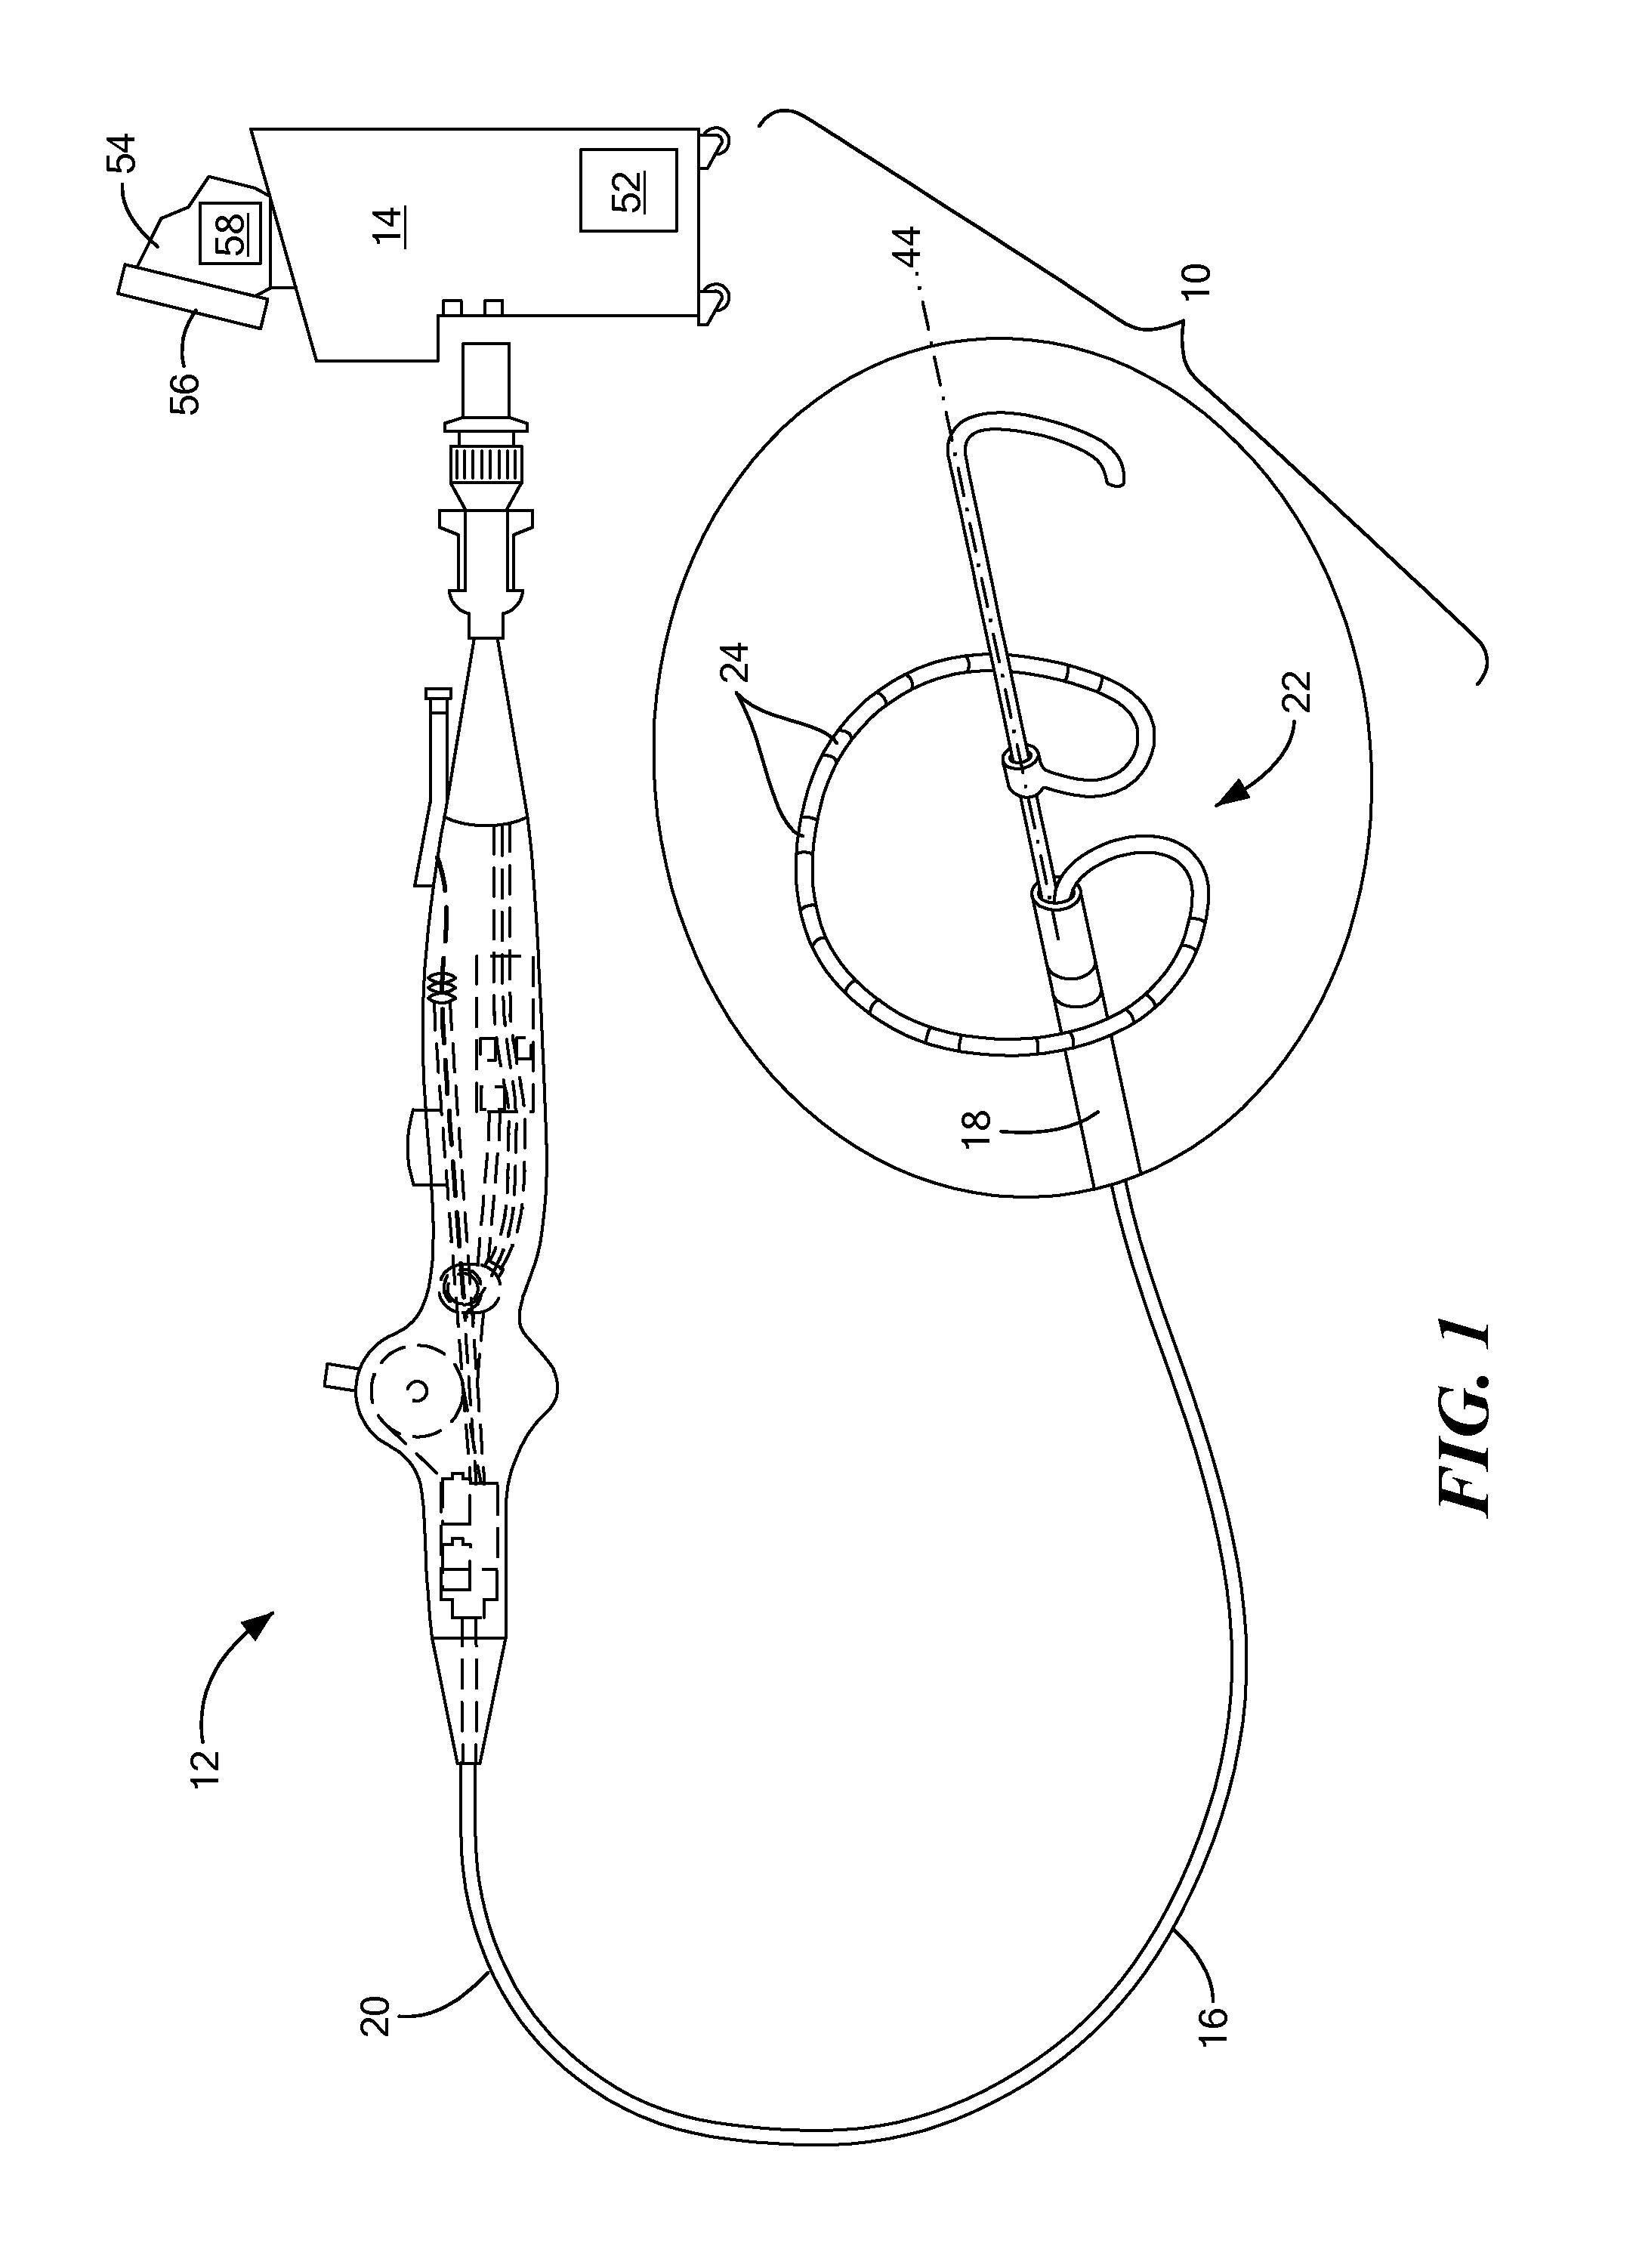 Tissue contact sensing with a multi electrode ablation catheter